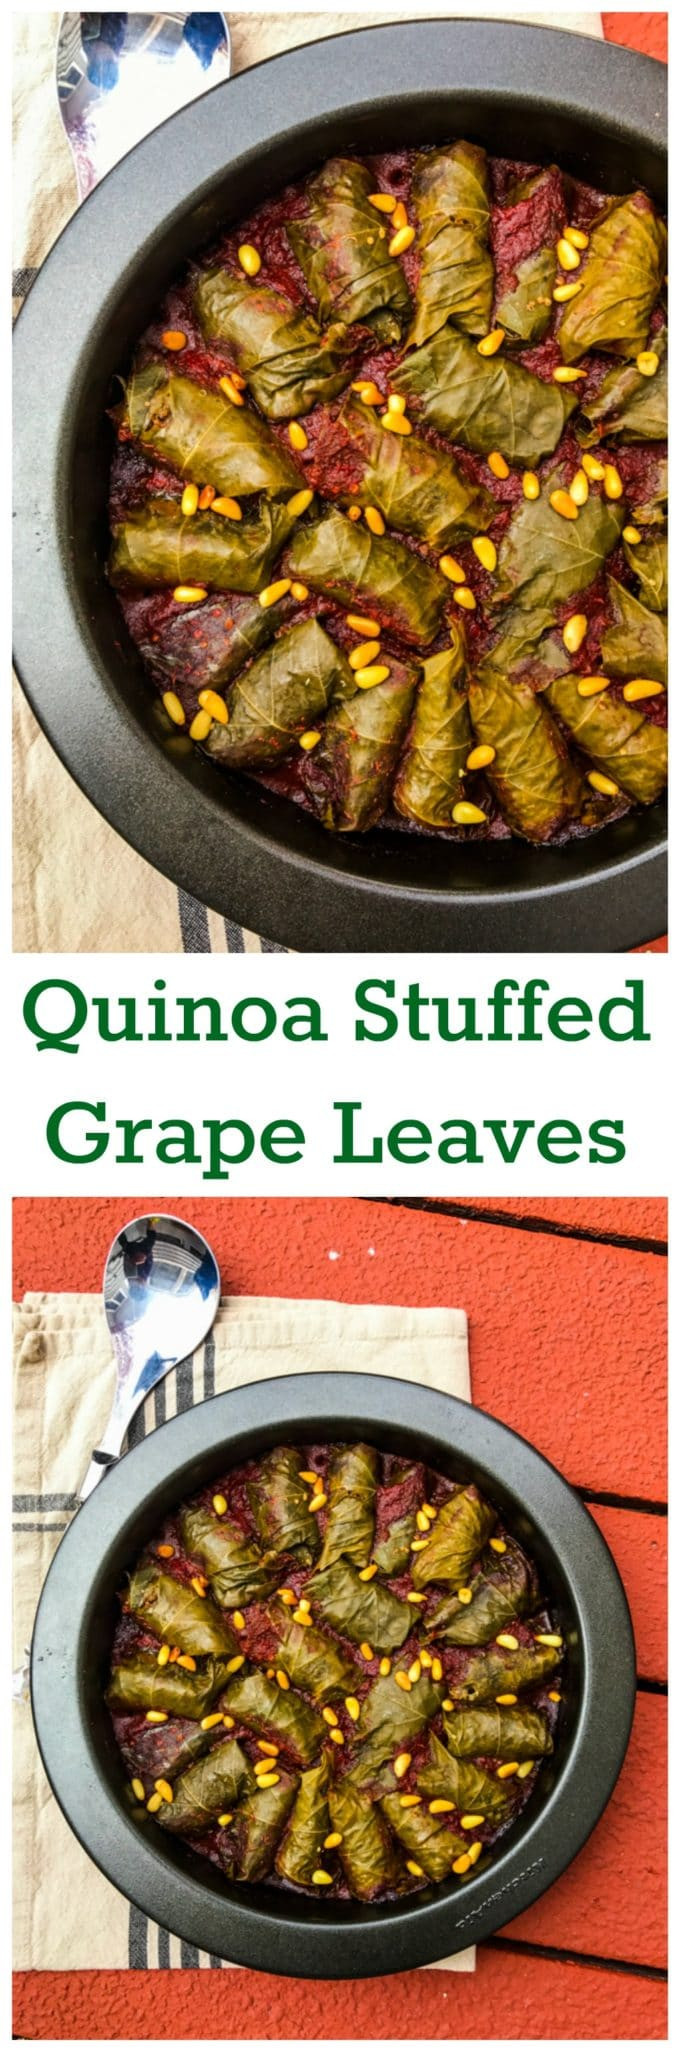 Quinoa For Passover
 Not Just For Passover Quinoa Stuffed Grape Leaves In Red